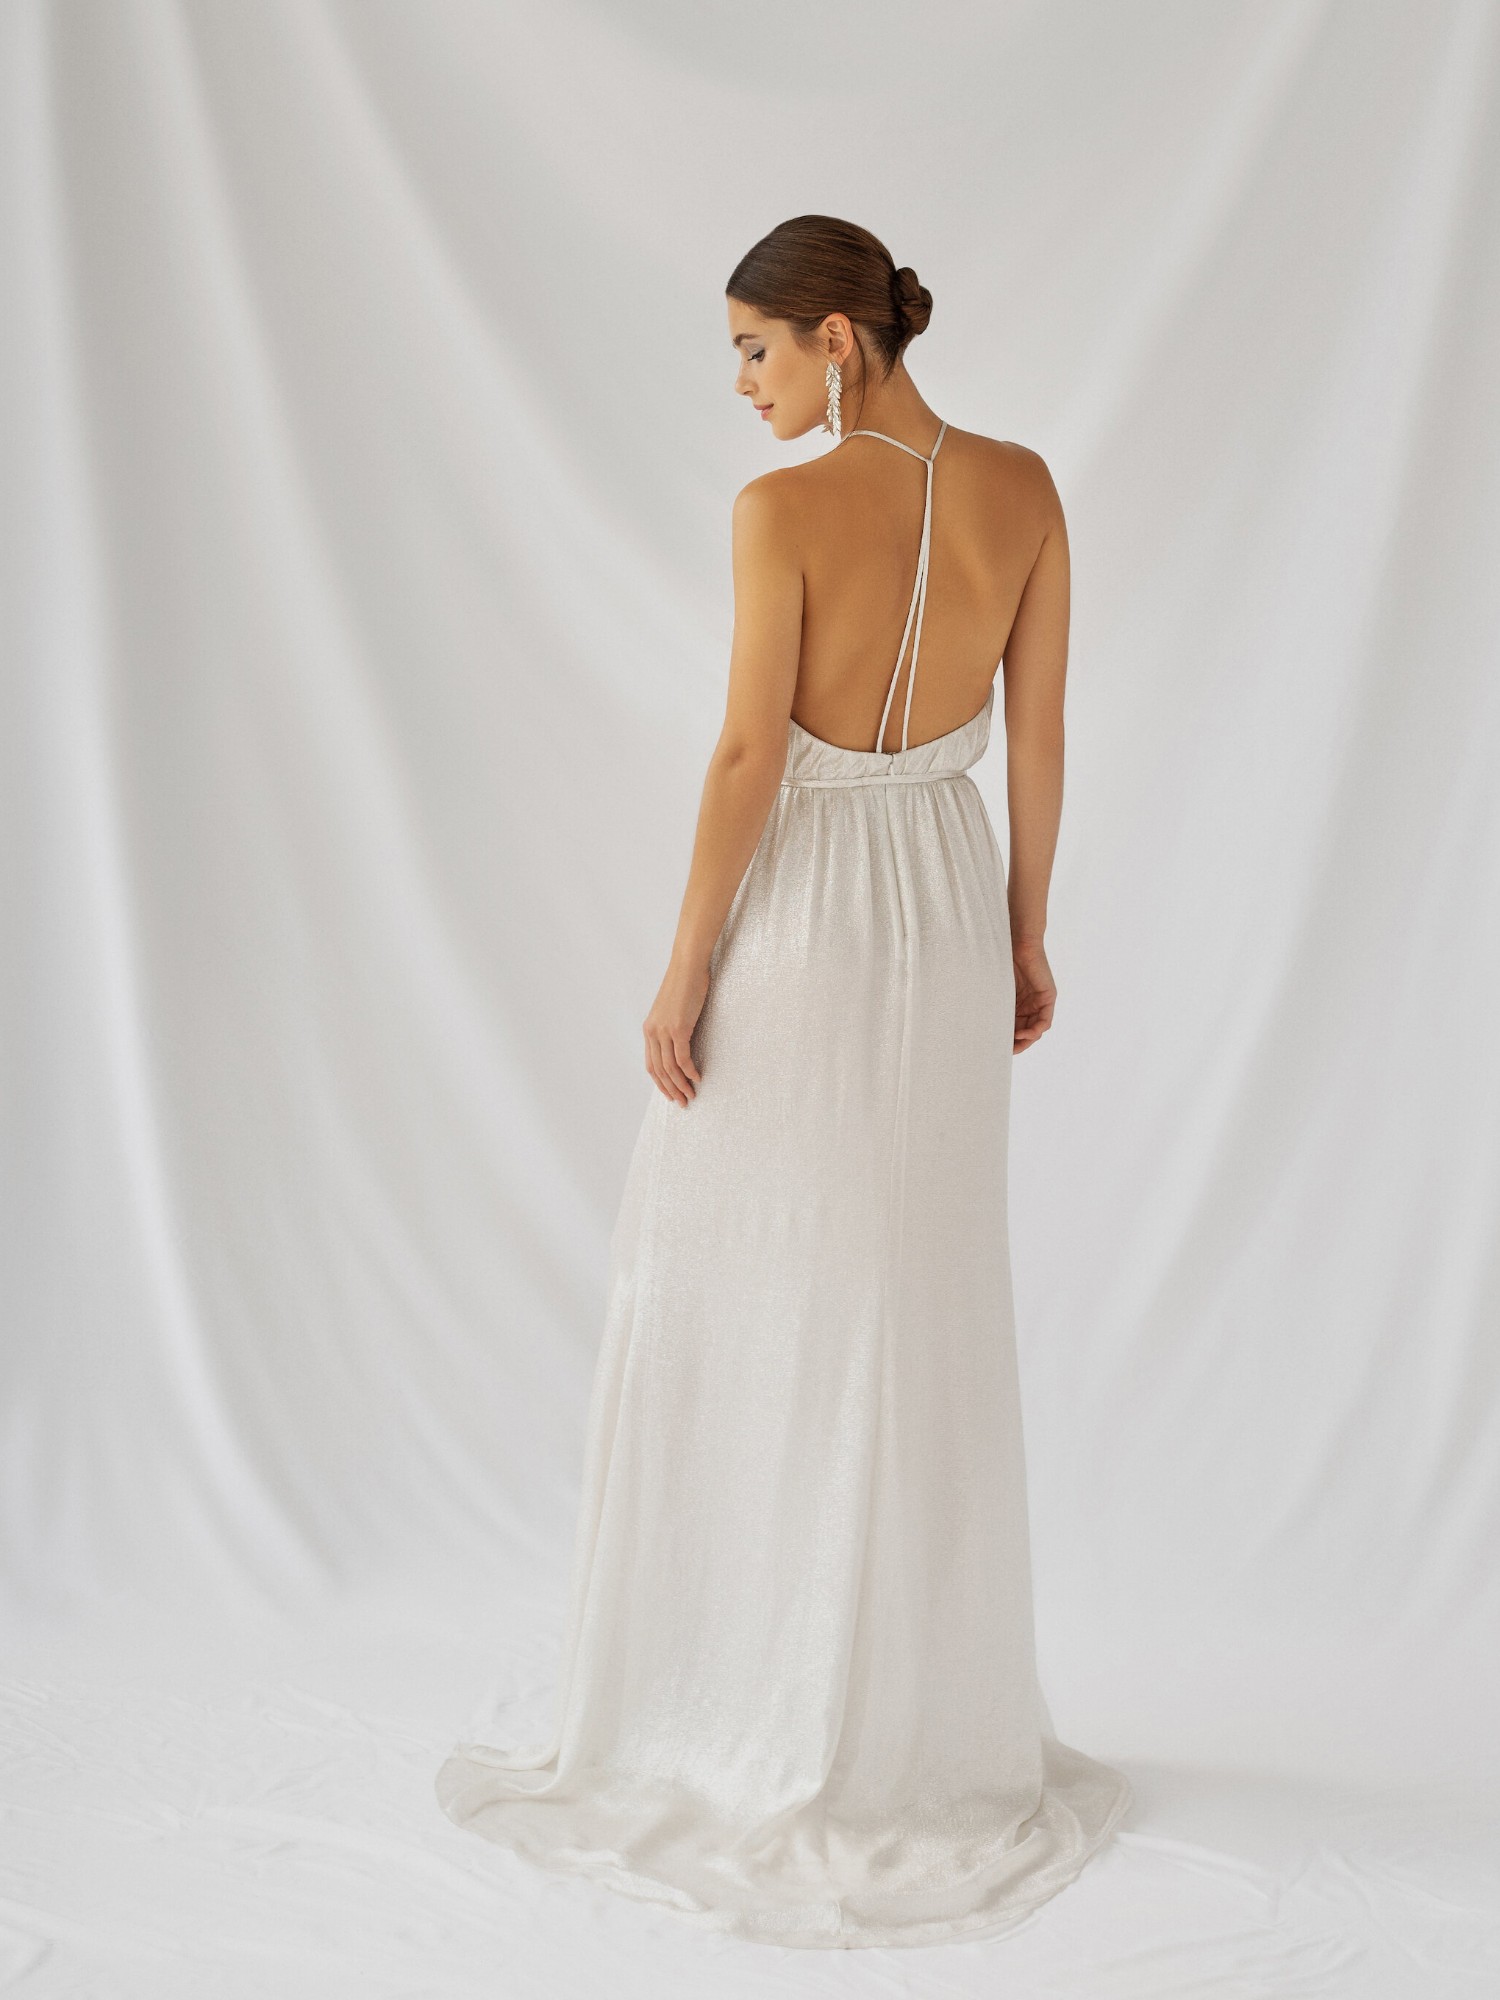 Moss Gown Inspirated By Botanica of Alexandra Grecco 2021 Bridal Collection